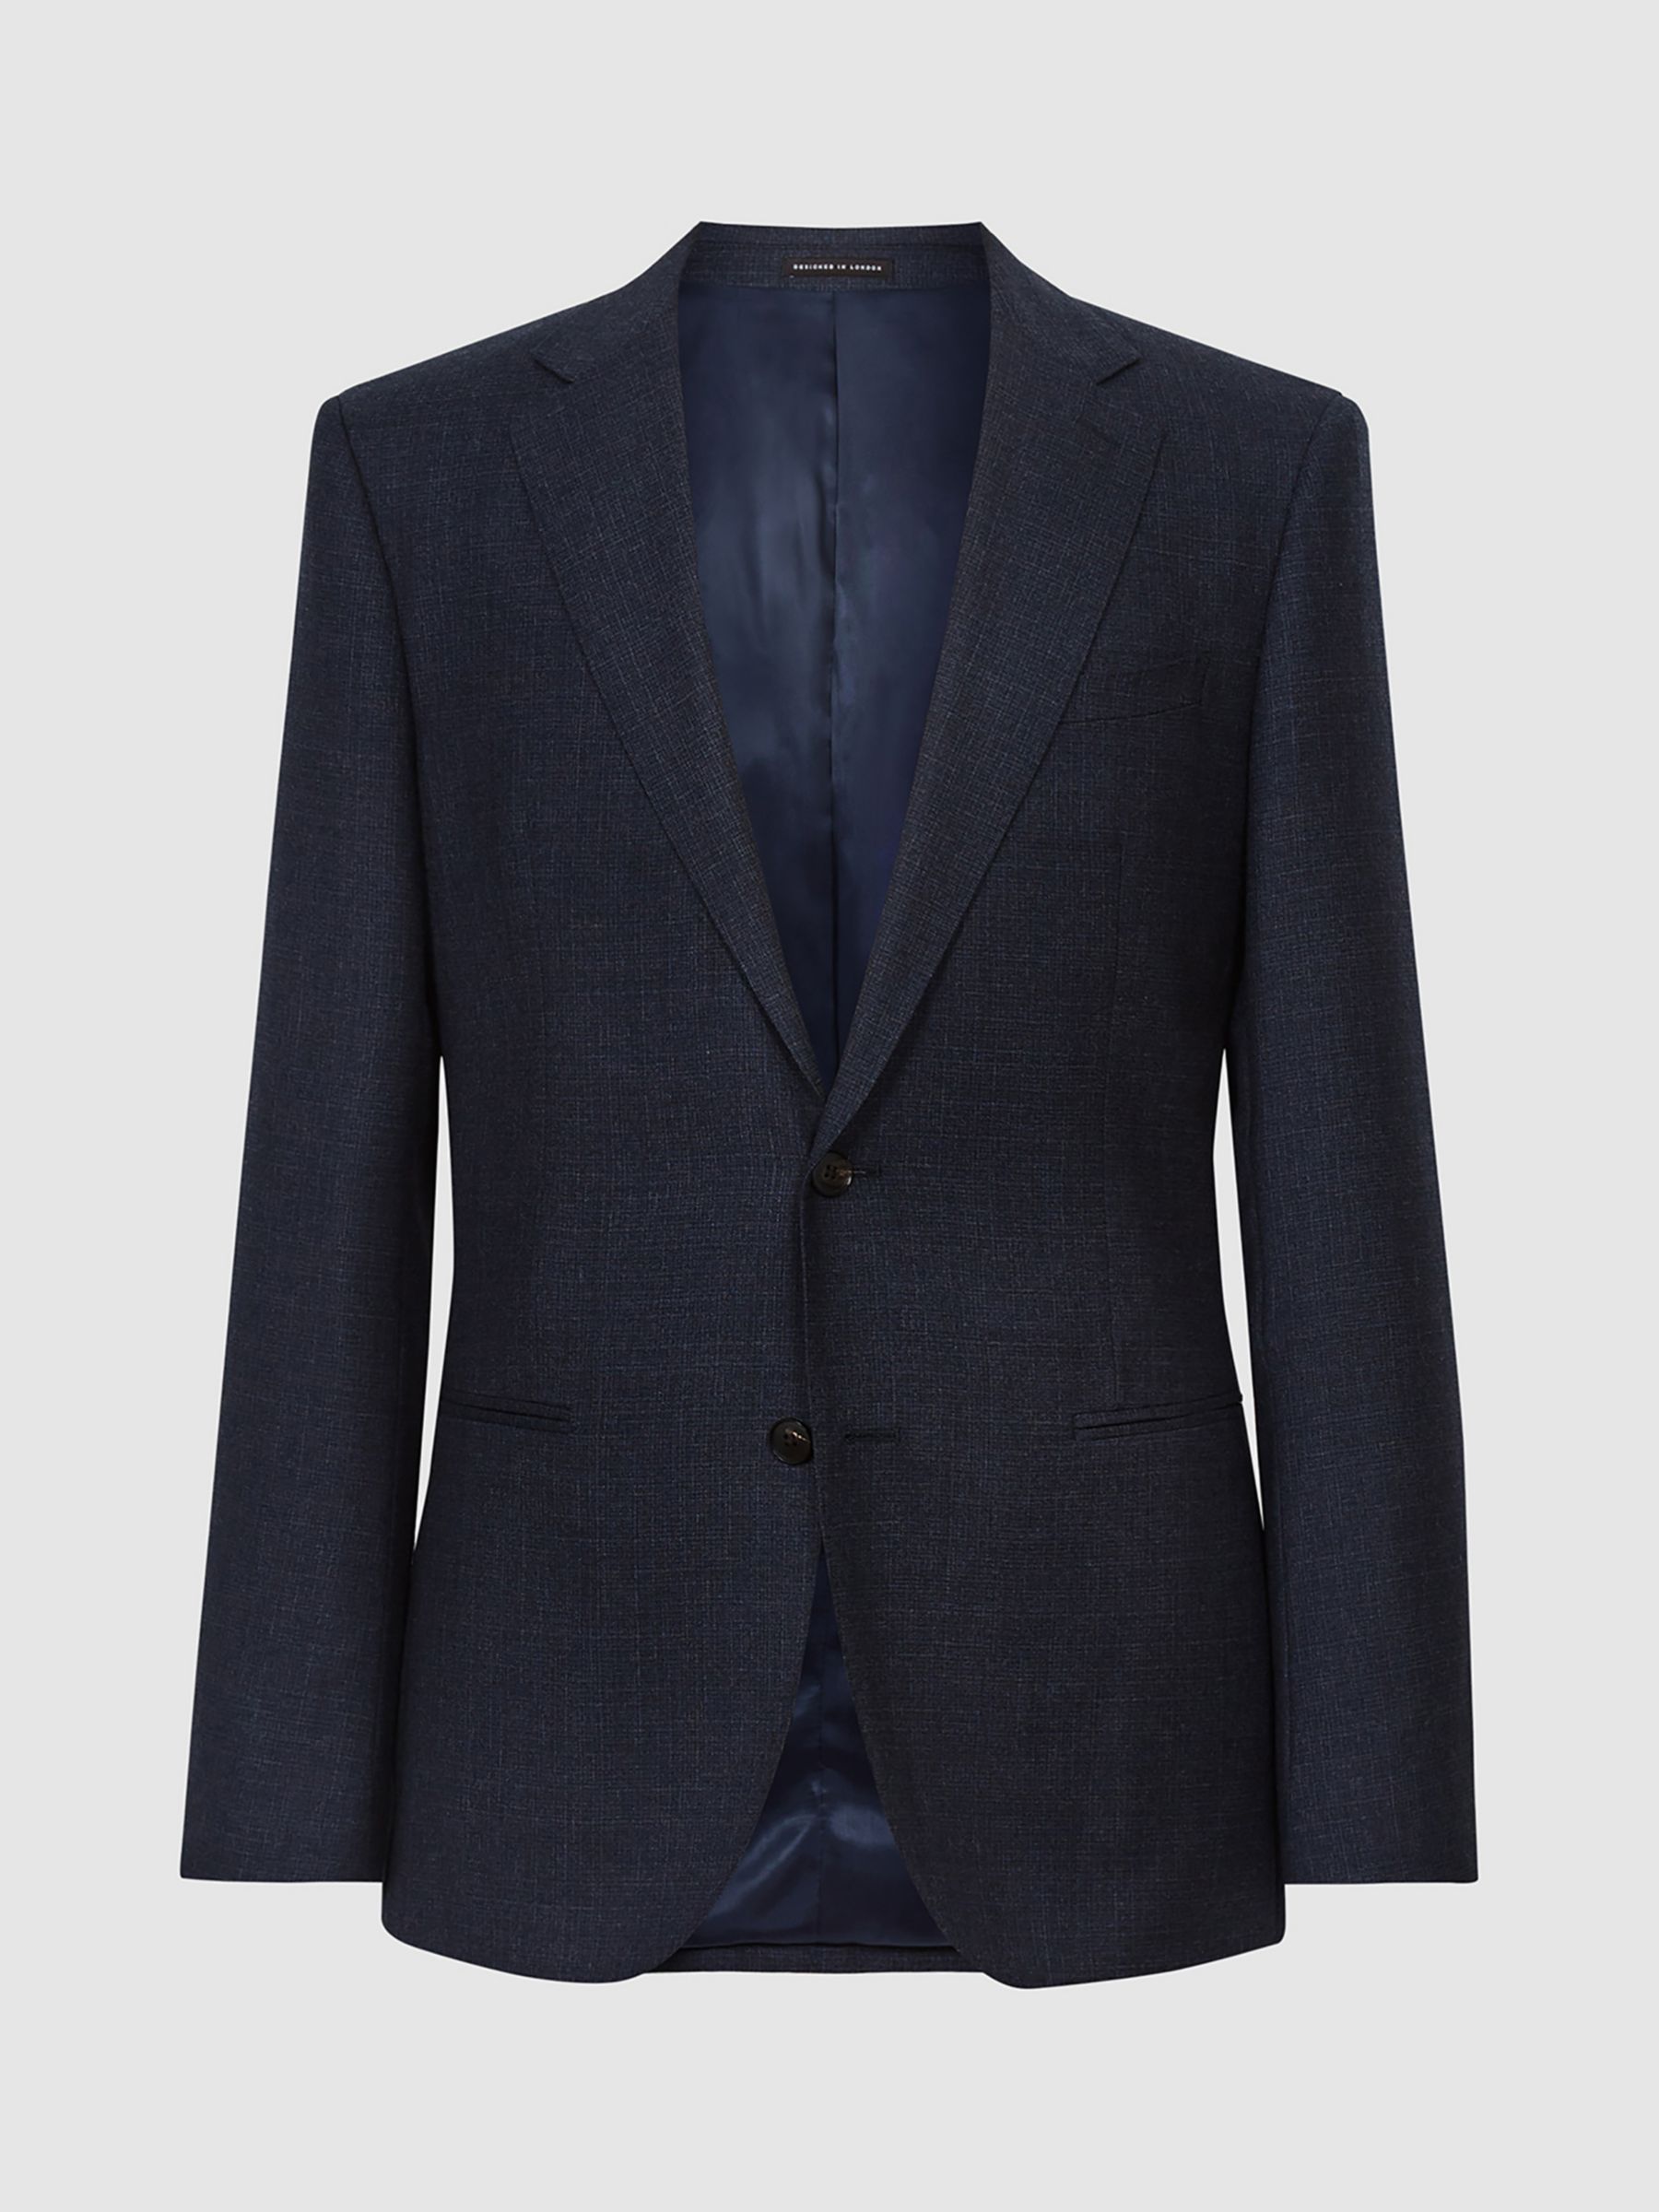 Reiss Dunn Textured Wool Tailored Fit Suit Jacket, Navy, 36